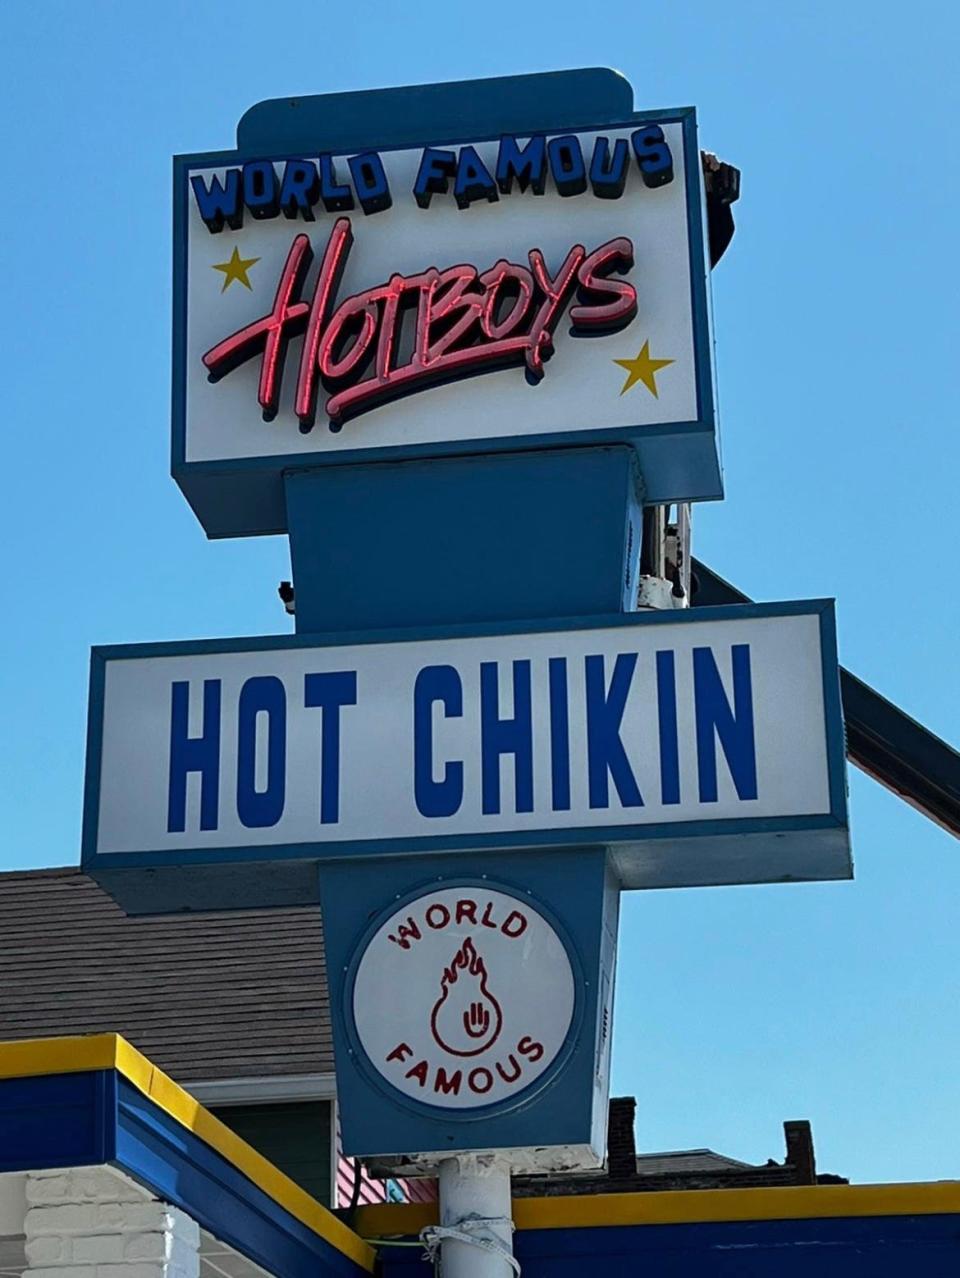 World Famous Hotboys has changed the old Peppy Grill sign at 1004 Virginia Ave., Indianapolis, as the Oakland, Calif.-based chicken chain prepares to open in Fountain Square in mid May 2022.